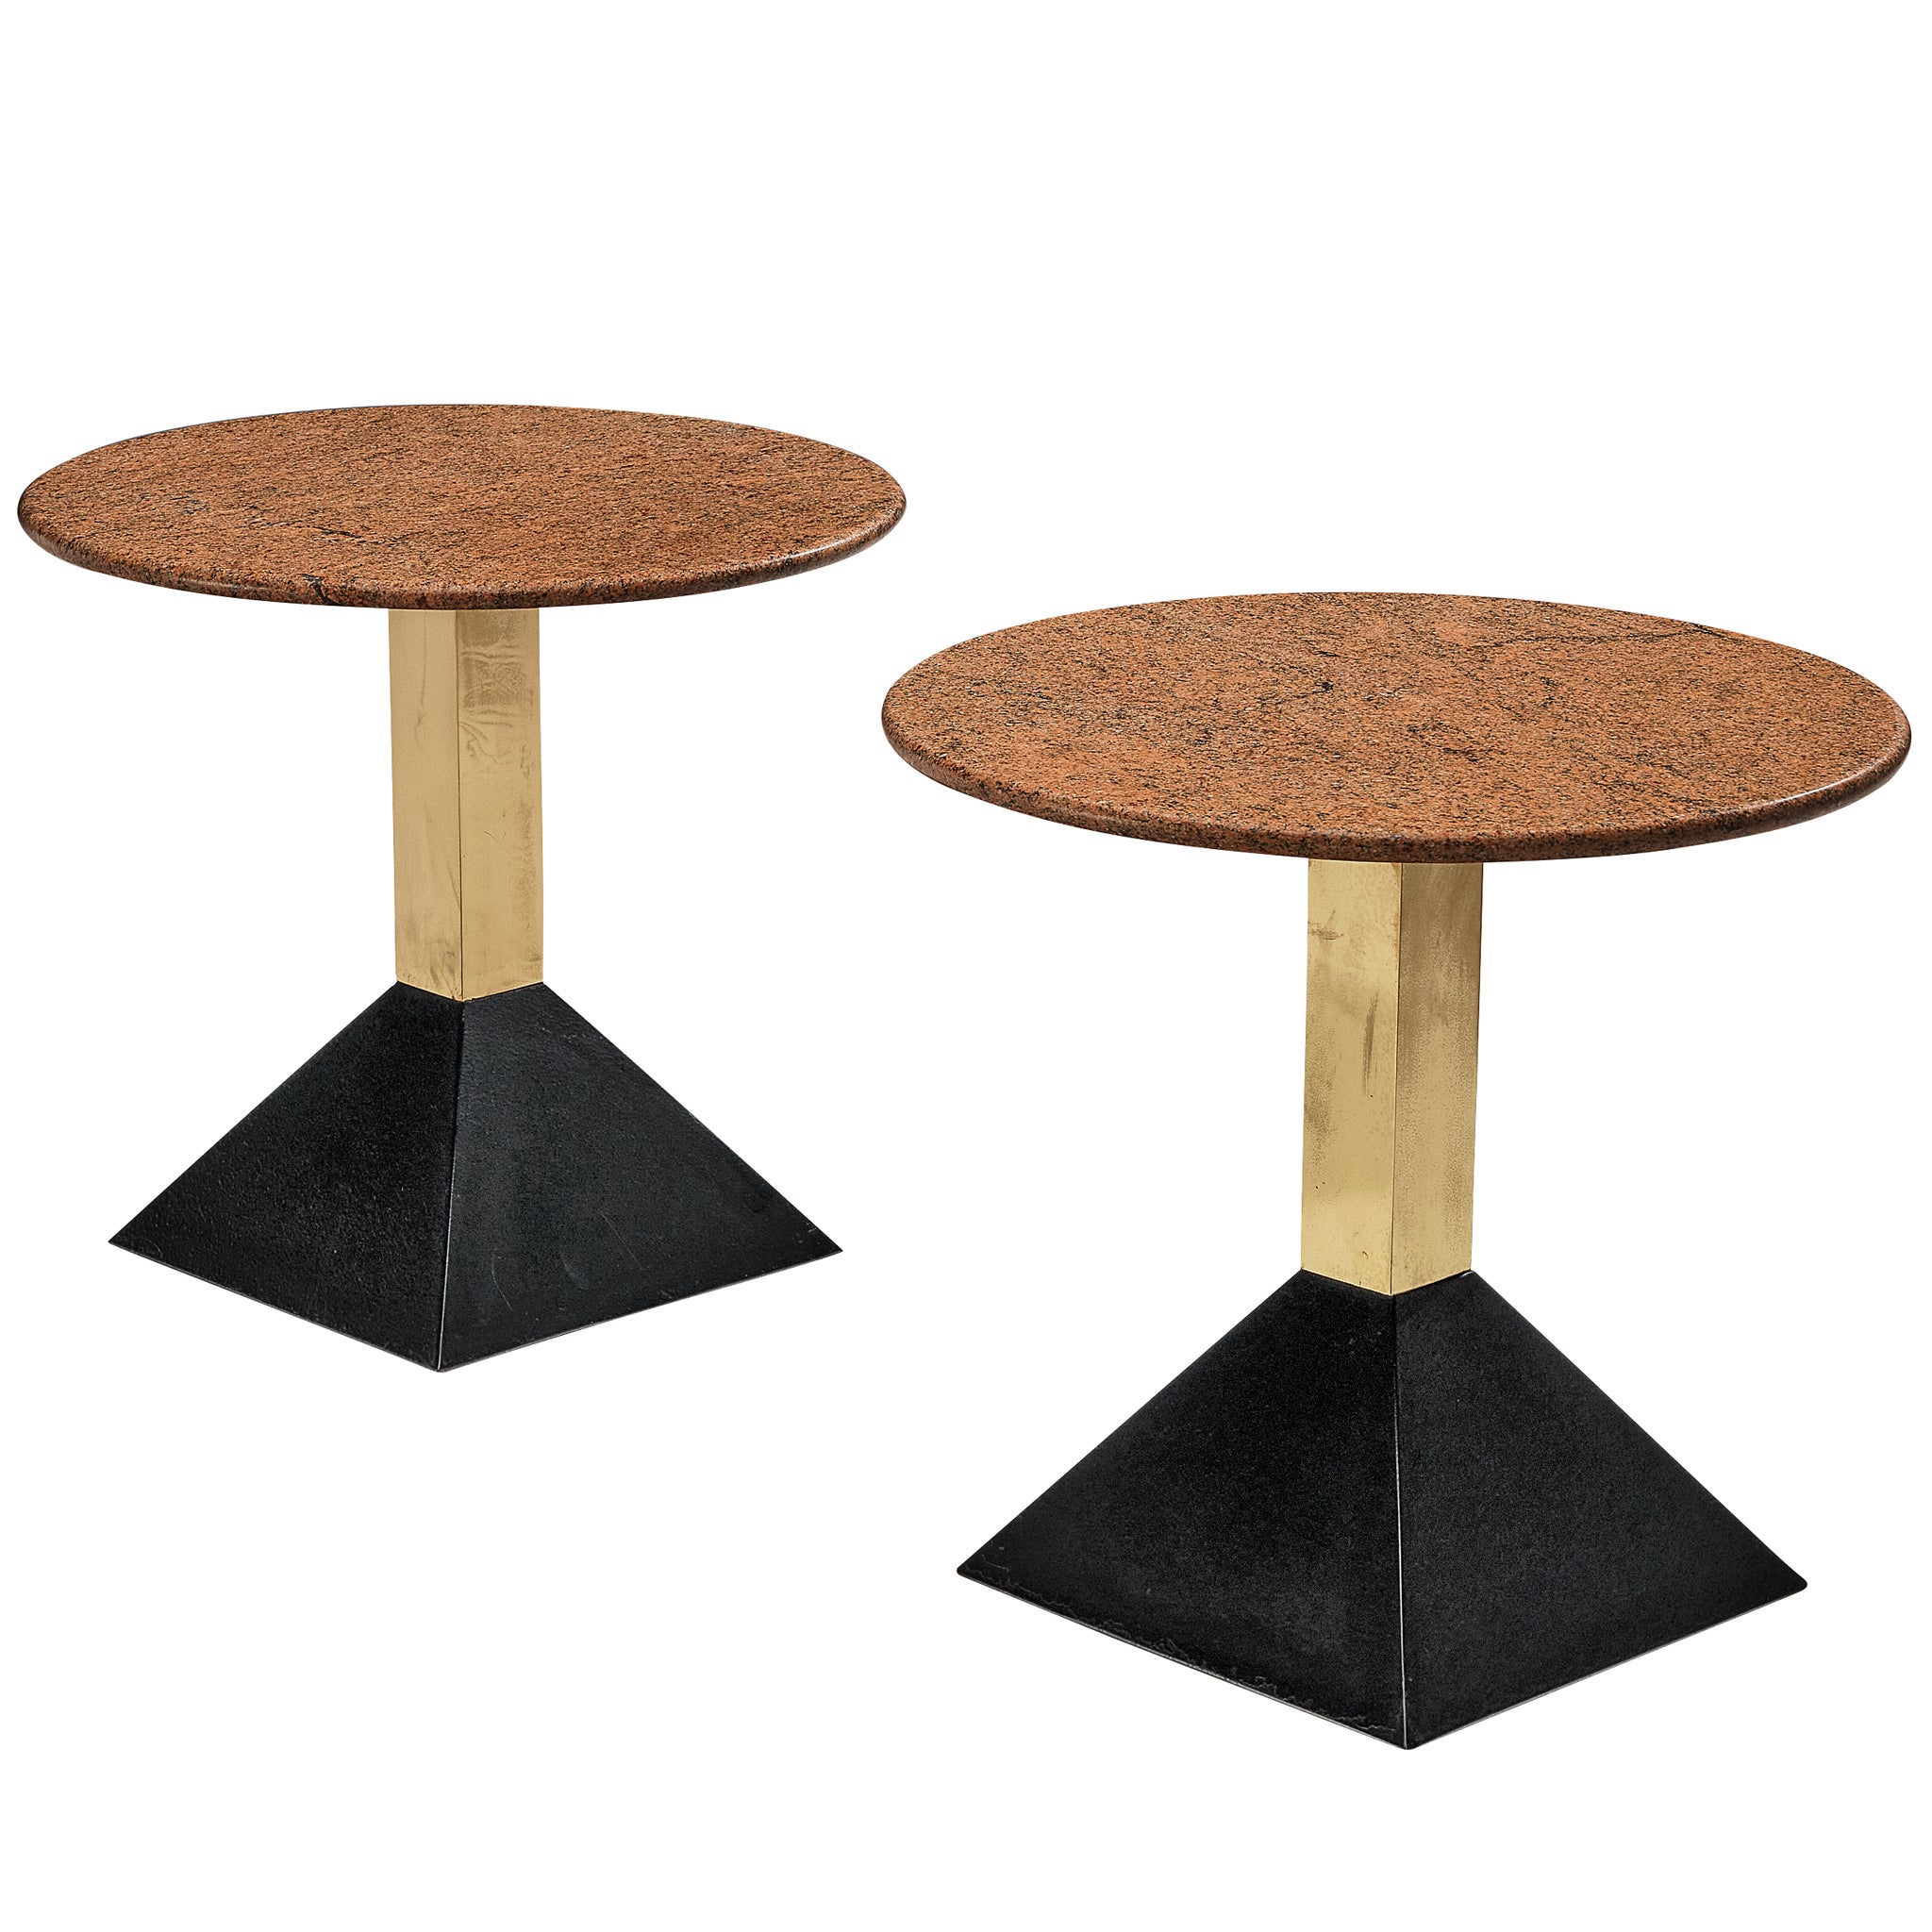 Italian Side Tables in Metal and Round Granite Tops